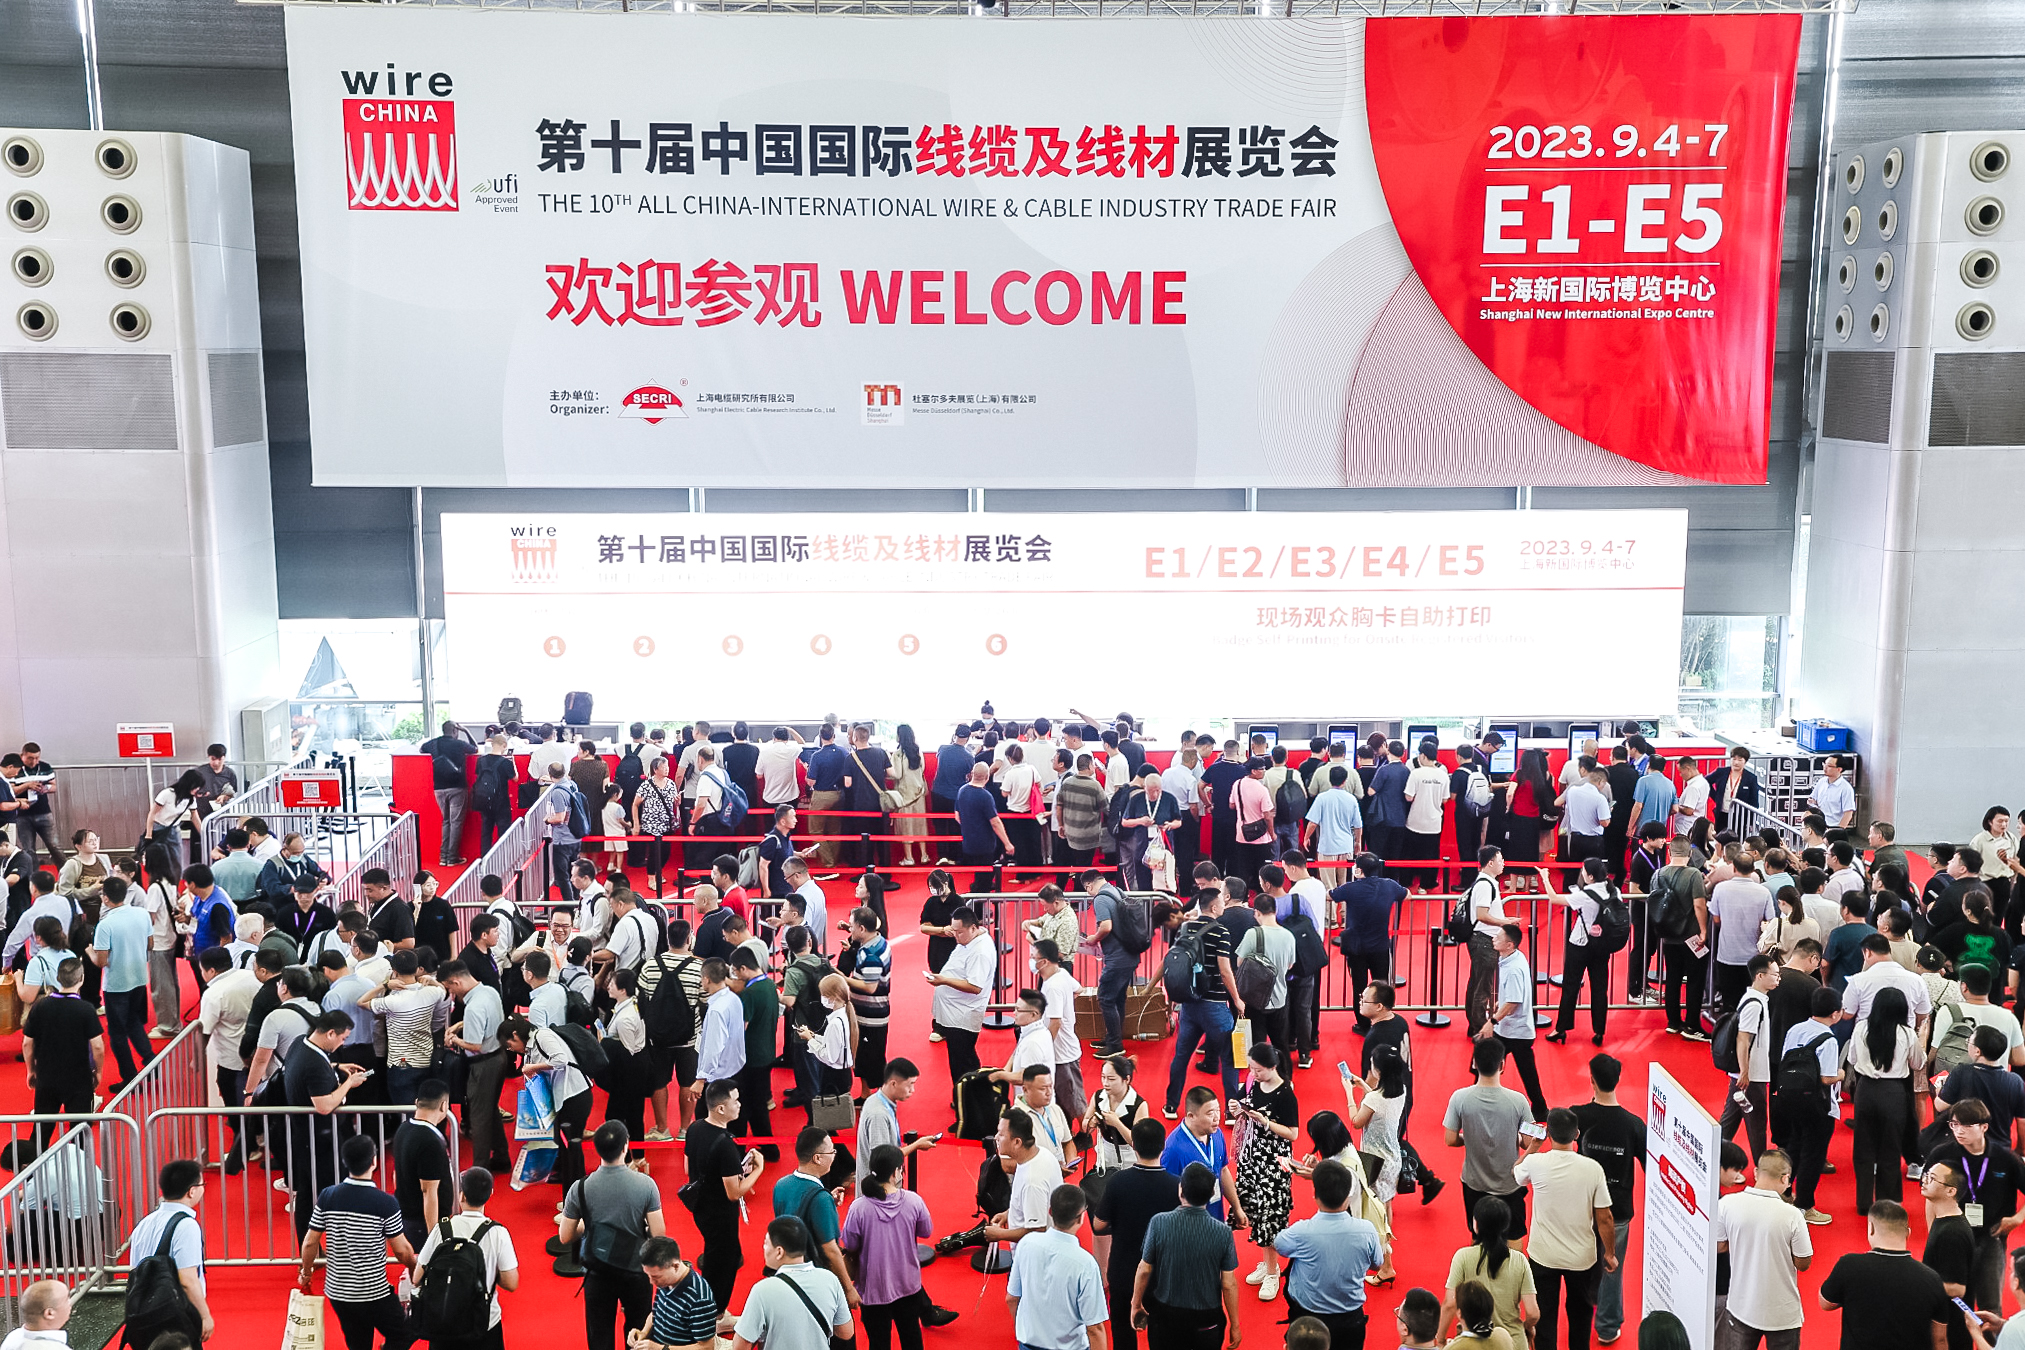 wire China 2023: Gathering Momentum to Drive the Future Development of the Wire & Cable Industry